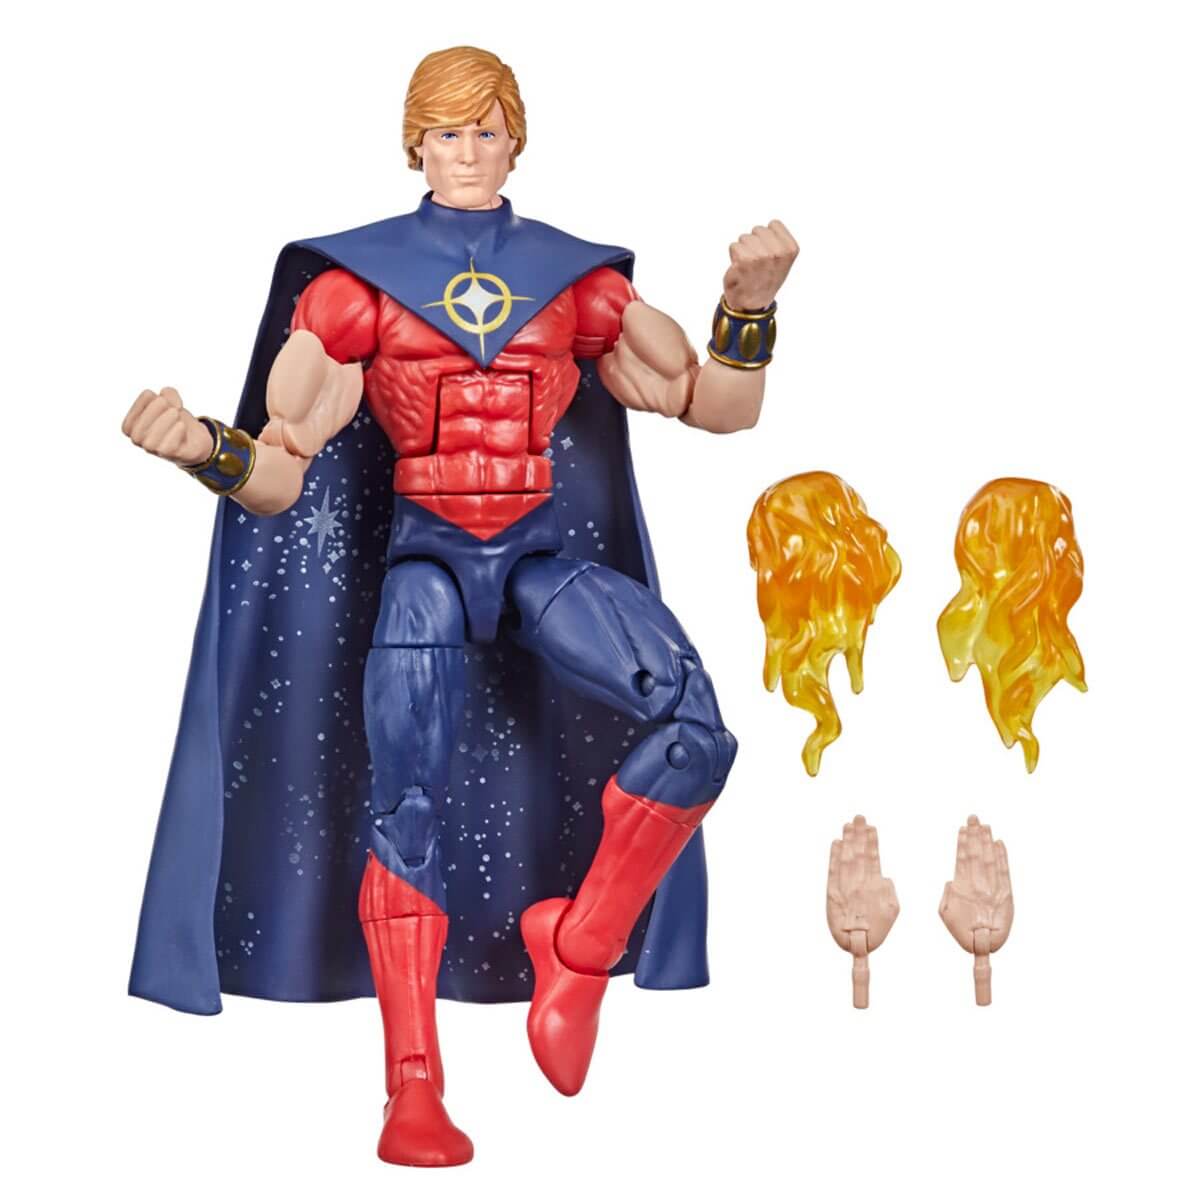 hasbro marvel legends quasar wendell vaughn figure with accessories 2blast effects and 1 extra pair of hands